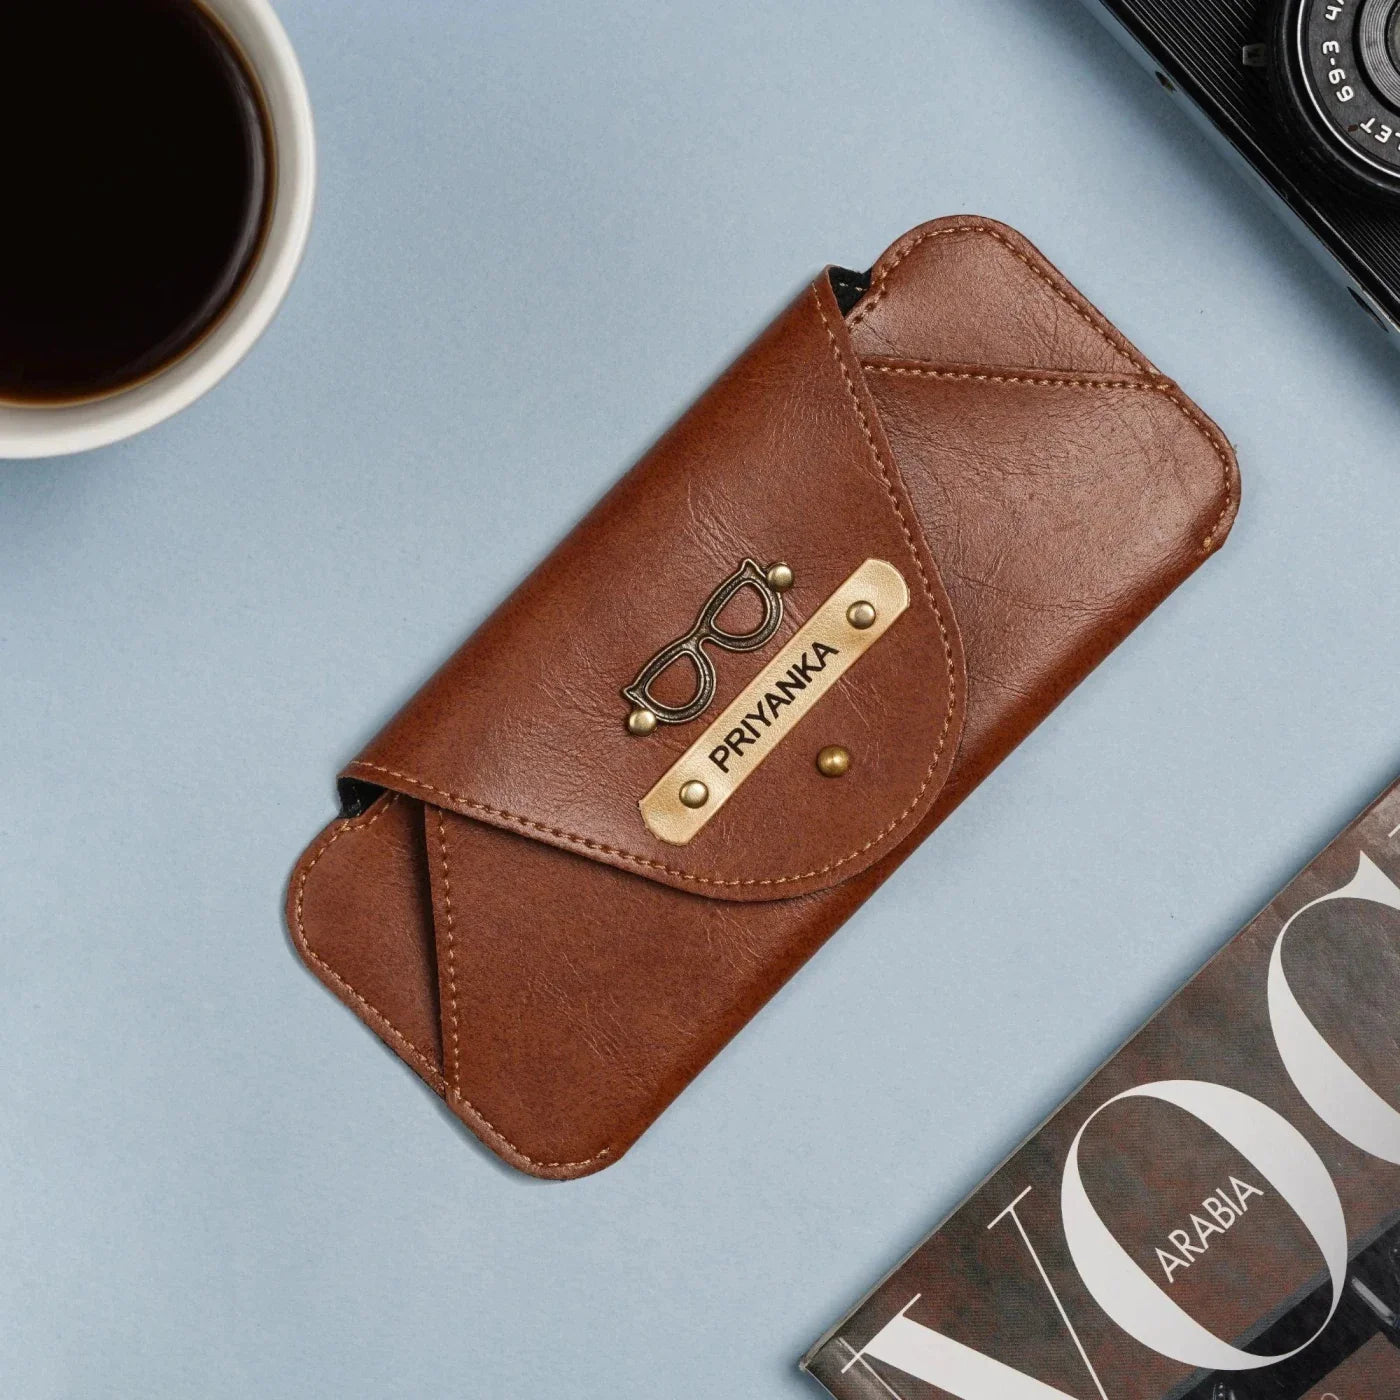 Made from premium materials, this personalized case exudes quality.